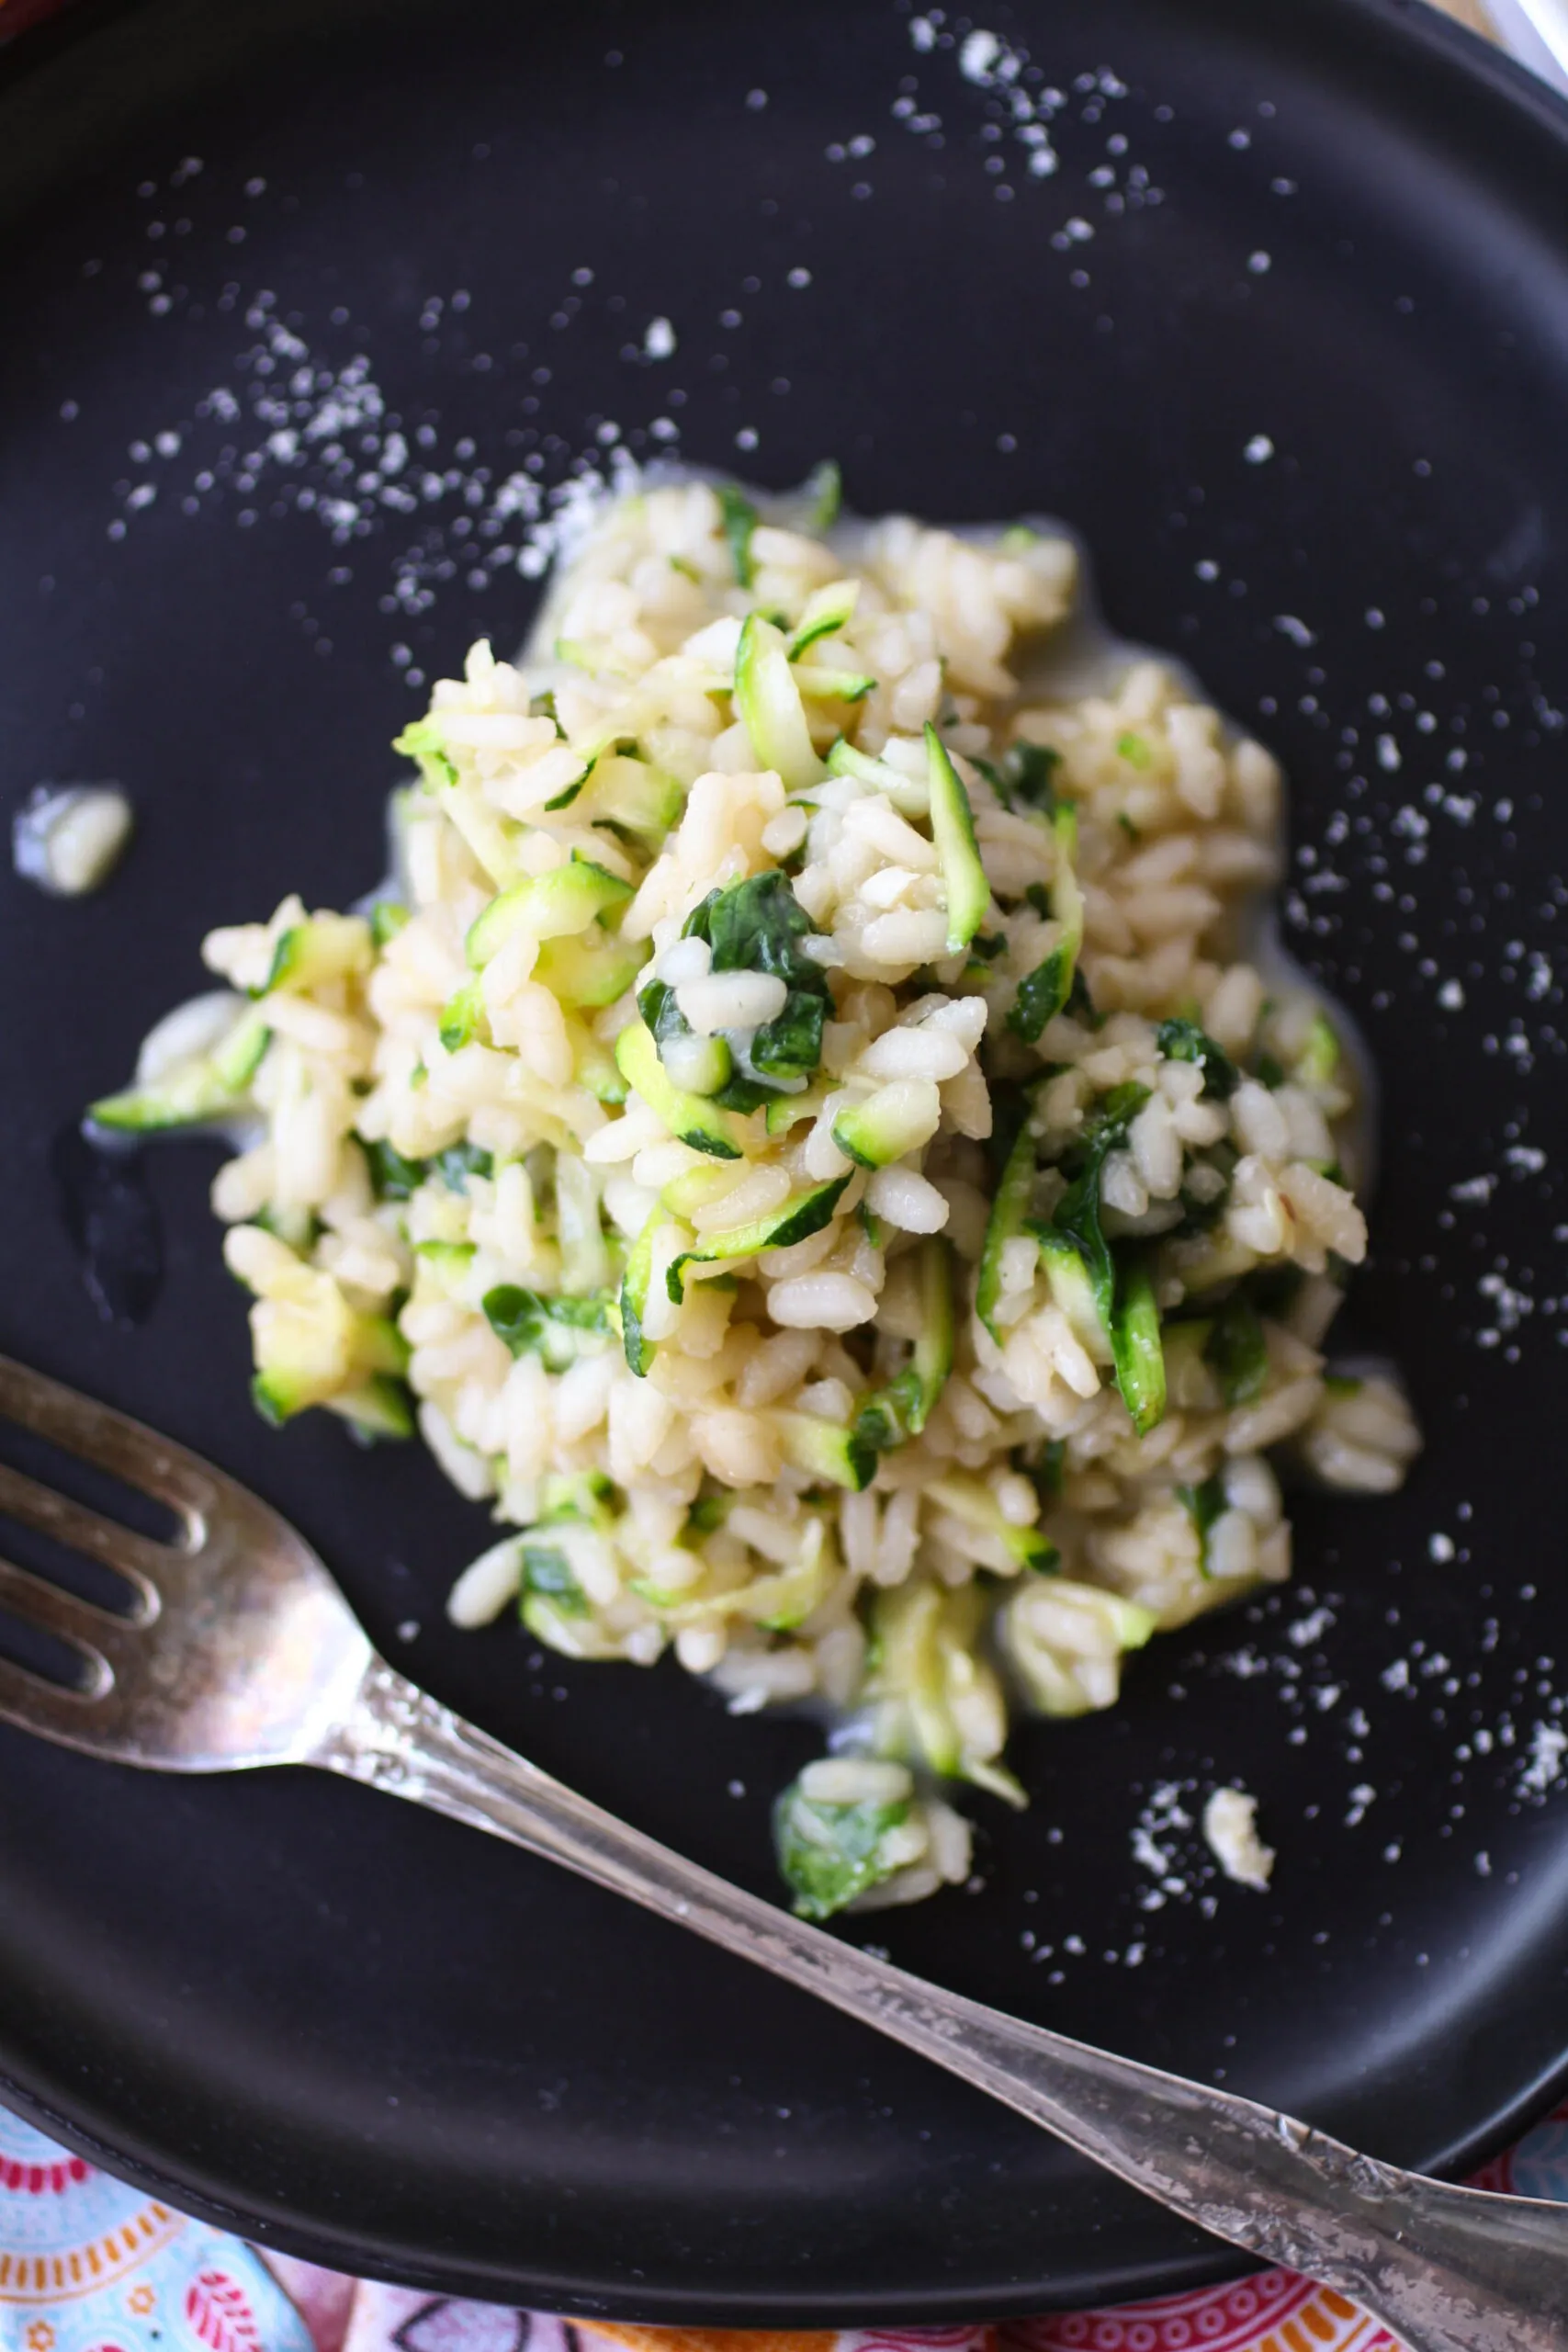 Summer Zucchini Risotto is an ideal main dish that's perfect for summer's bounty!